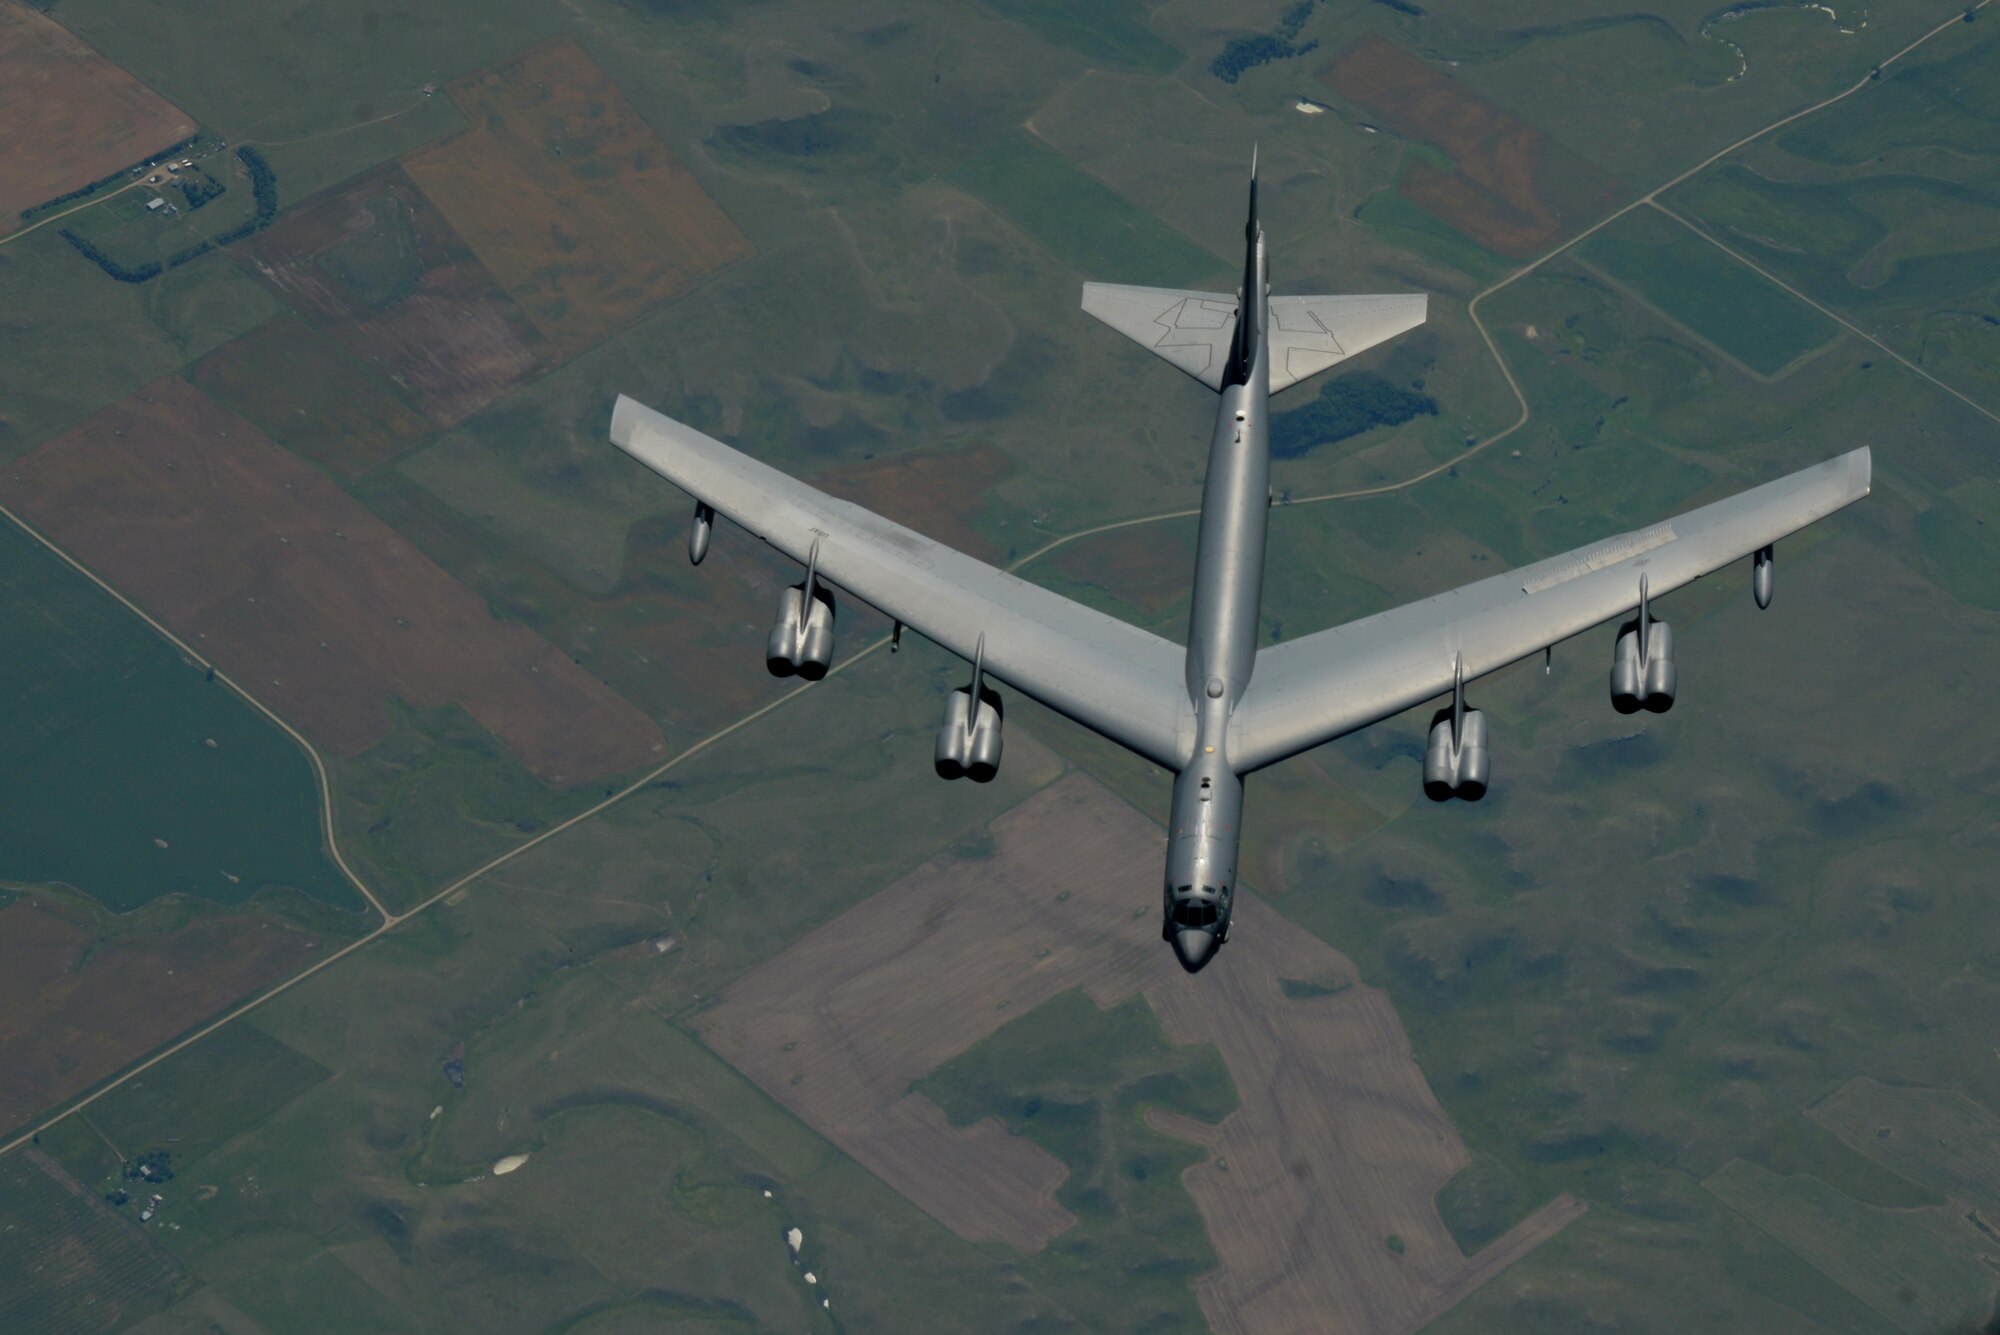 A B-52 Stratofortress soars above Minnesota enroute to Polar Roar, July, 31, 2016. Polar Roar is a mission held in the Arctic Circle that demonstrates the ability to provide a flexible and vigilant long-range global-strike capability. (U.S. Air Force photo/Airman 1st Class Christopher Thornbury)